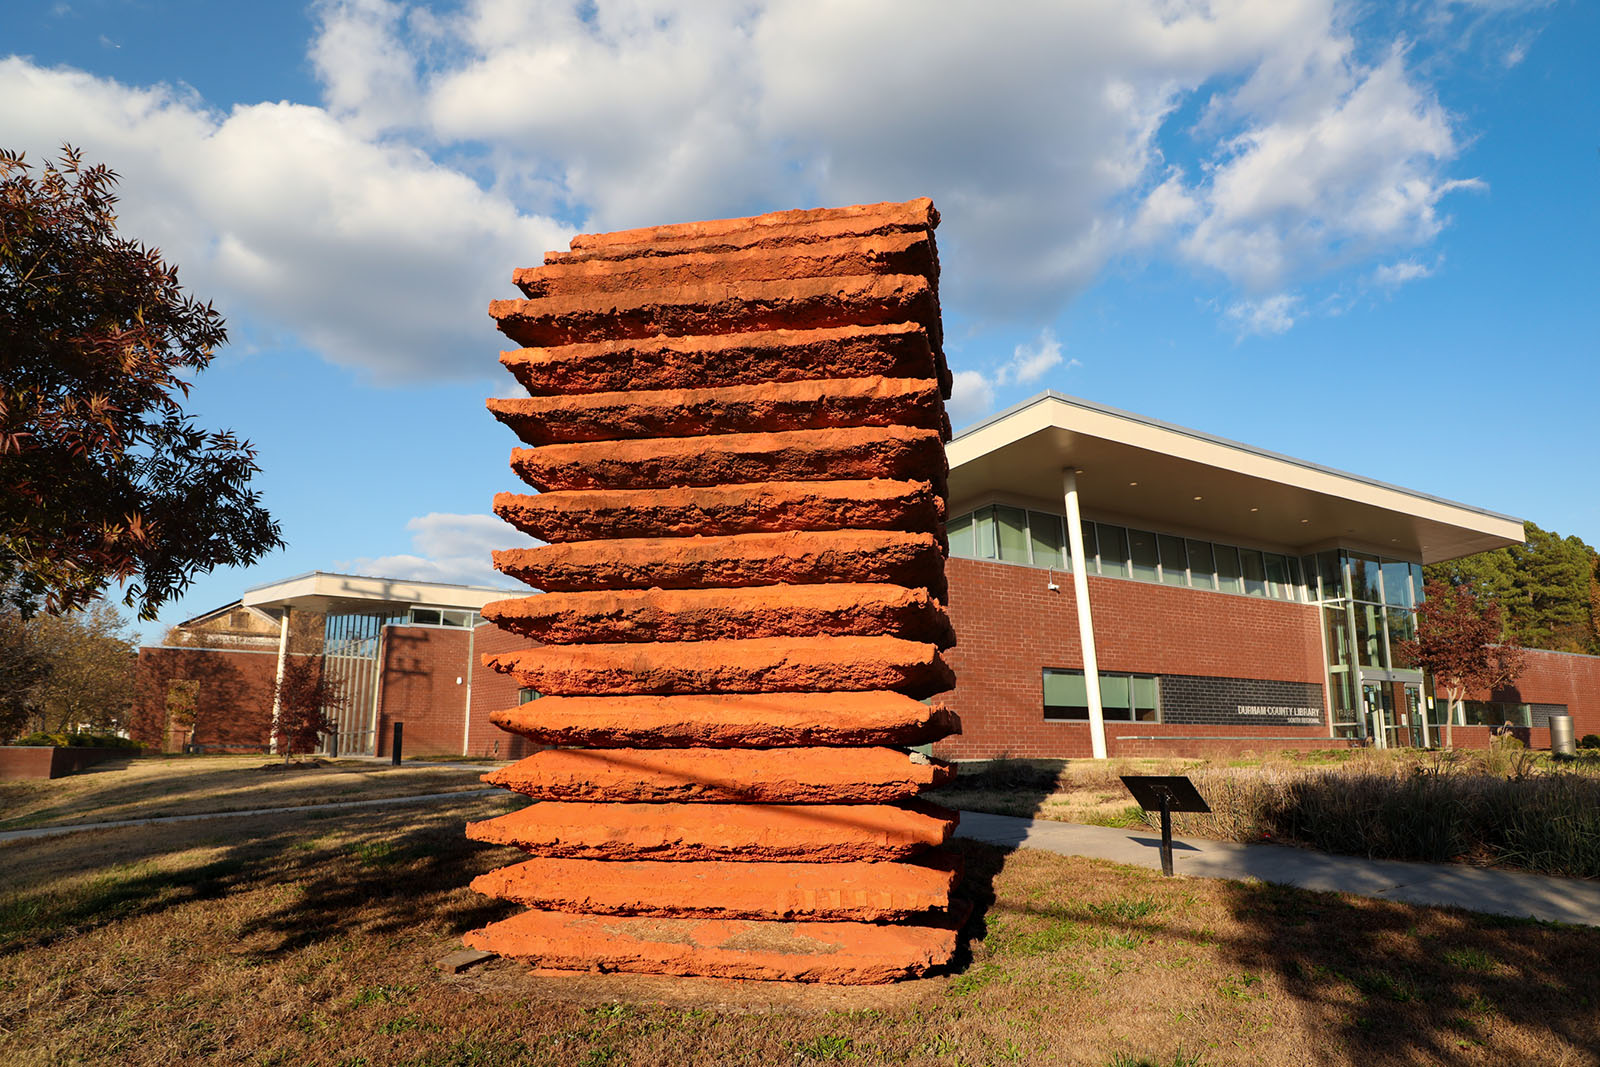 A tall, earth-colored sculpture, in the shape of a stack of slabs, standing in front of a building